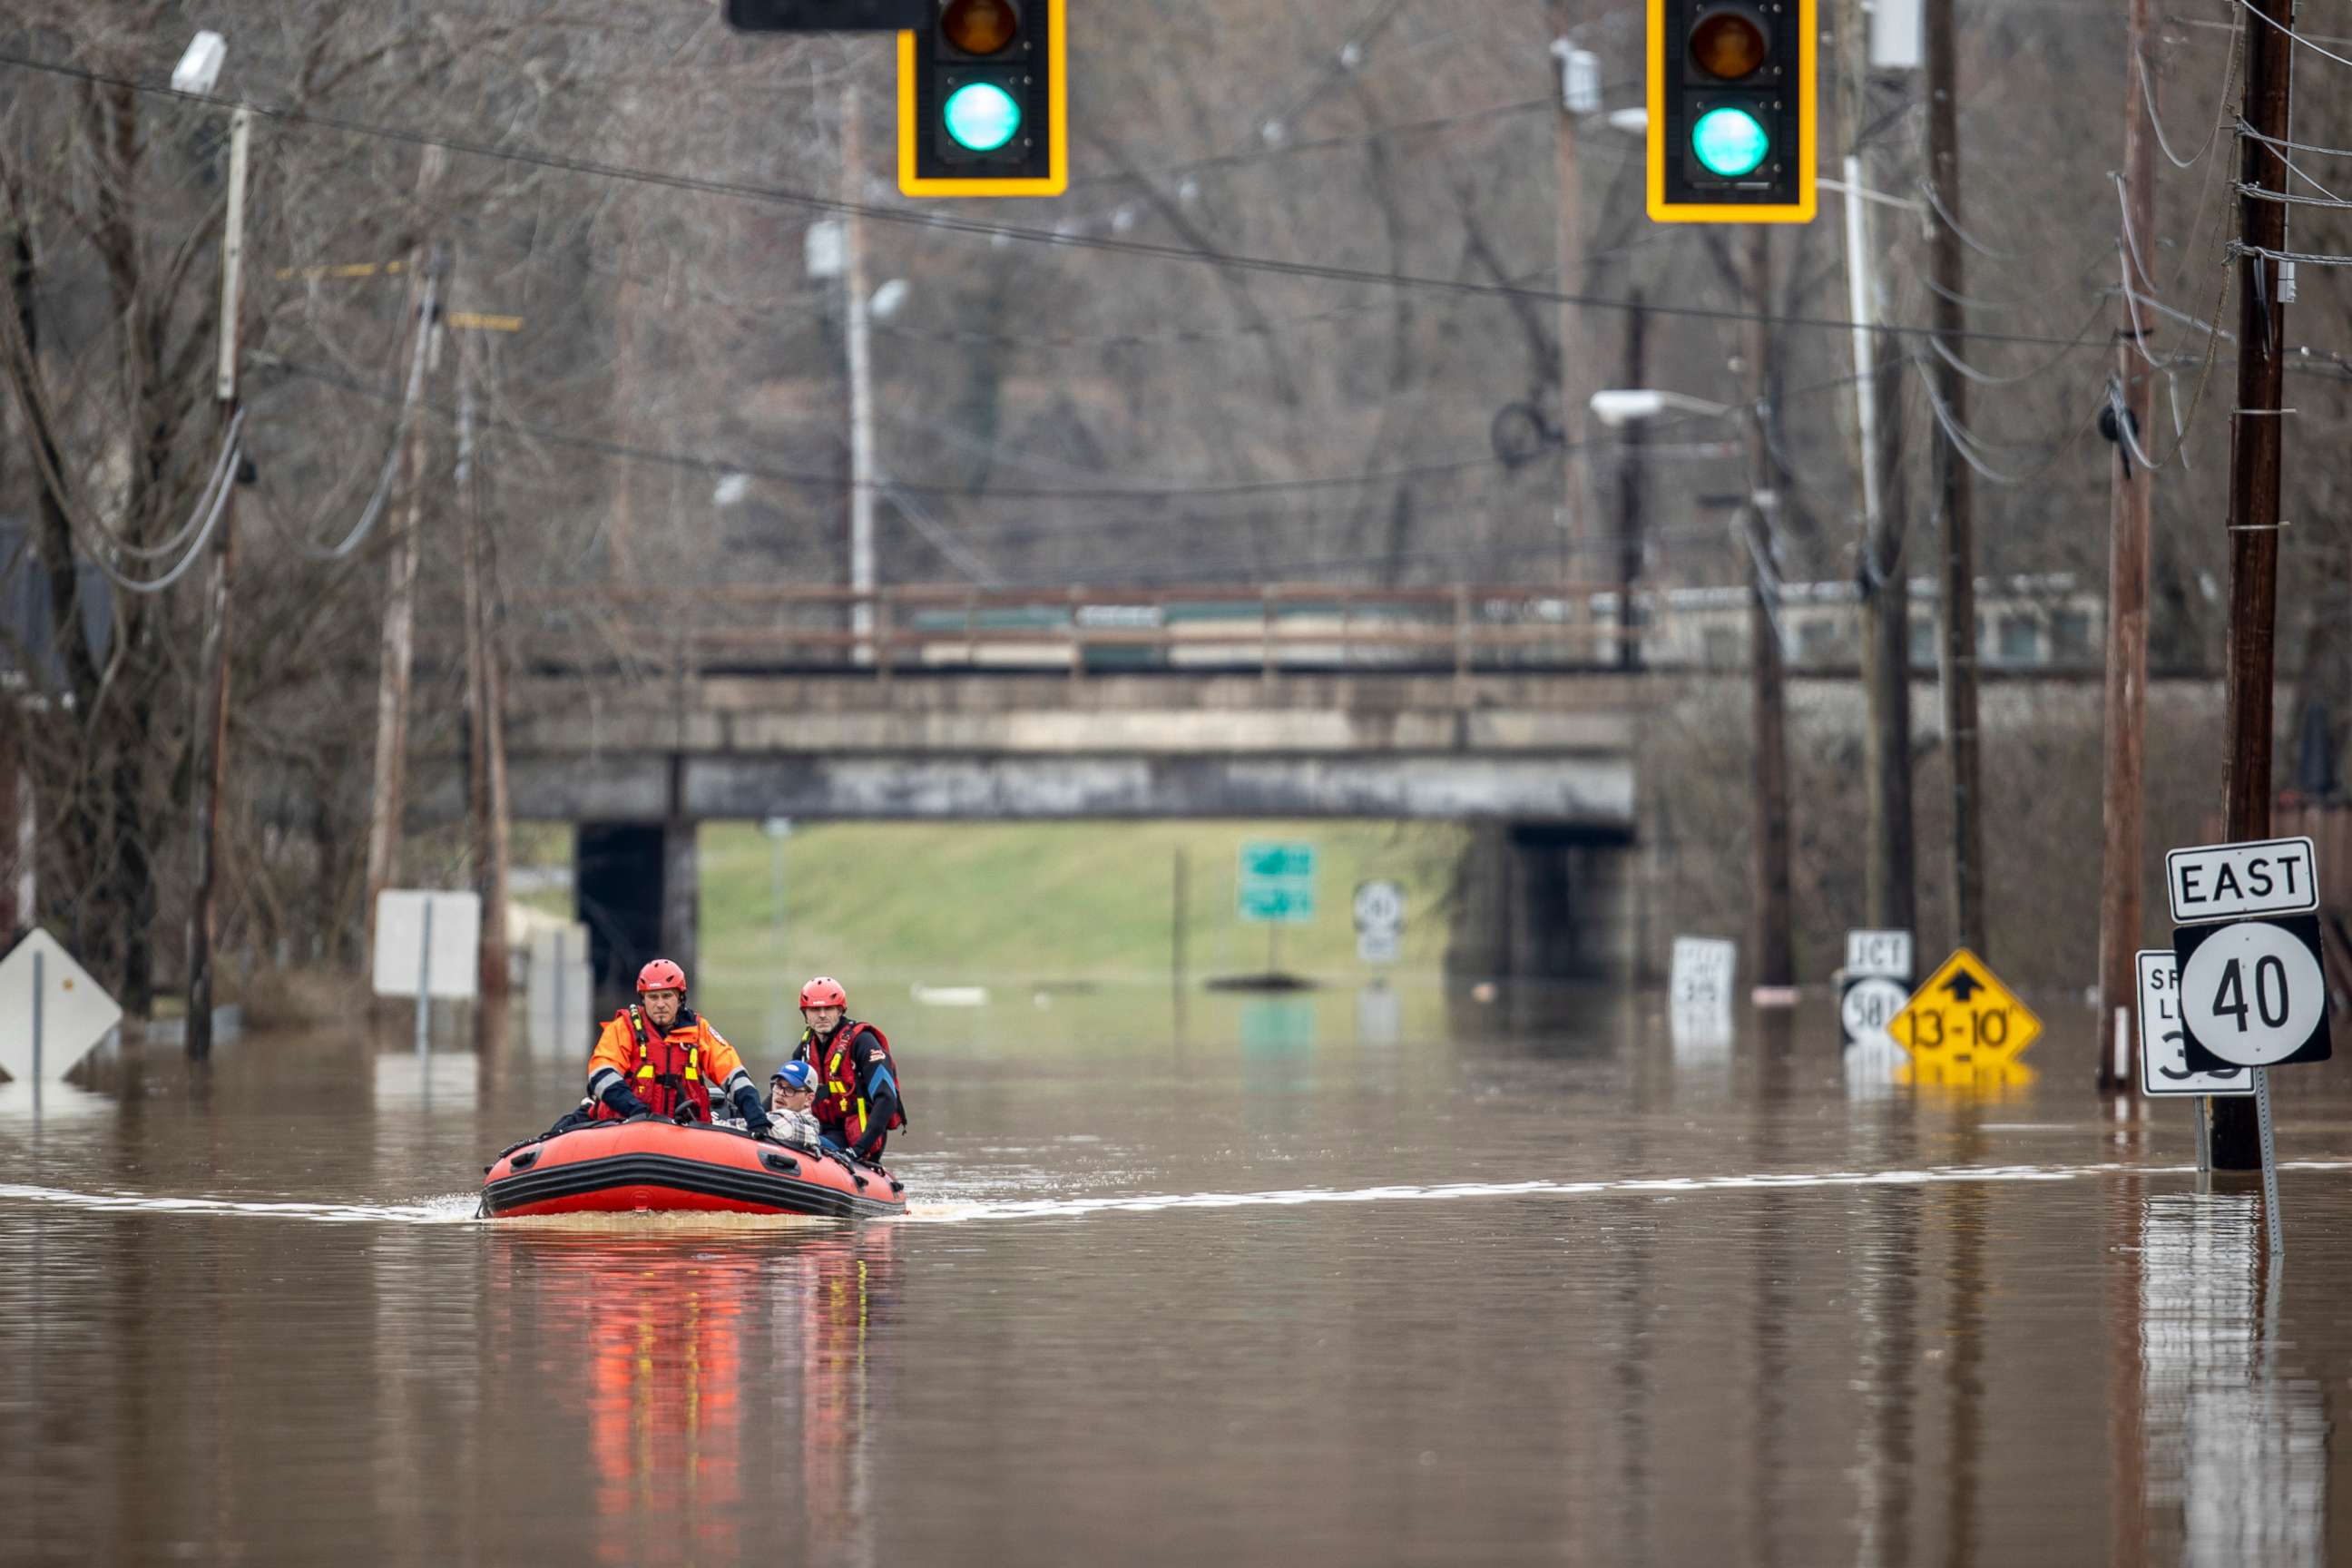 PHOTO: Michael Oiler, left, of the Thelma Fire Department, and Ricky Keeton, of the Oil Springs Fire Department, conduct a water rescue in Paintsville, Ky., following heavy rain on March 1, 2021.